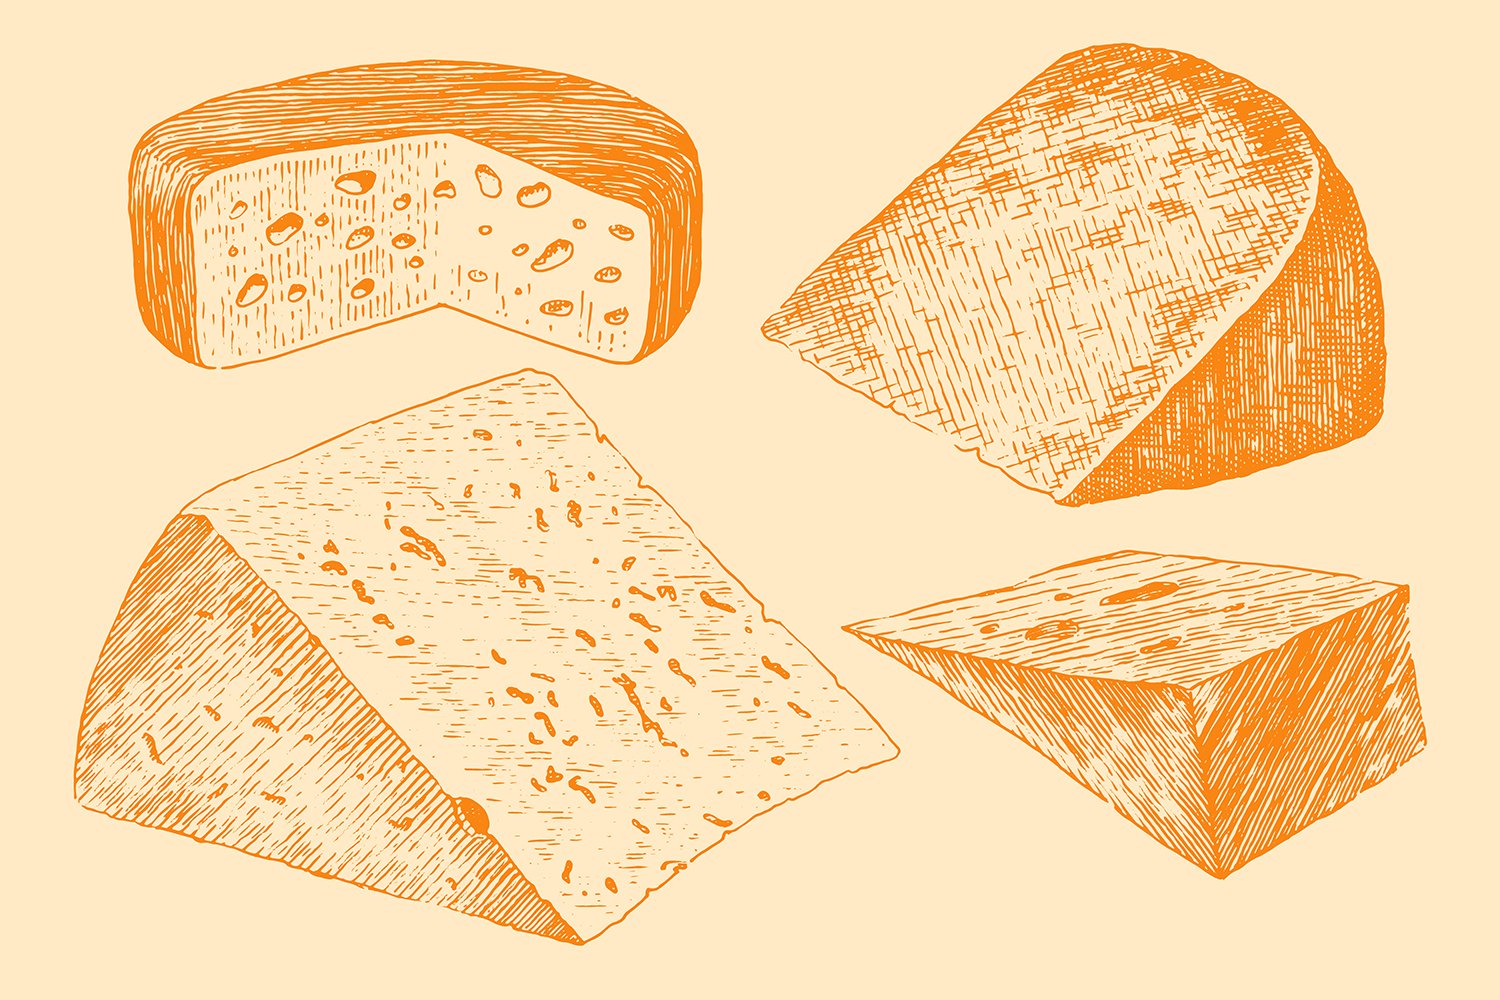 Colorful hand-drawn image of a head and slices of hard cheese on an orange background.